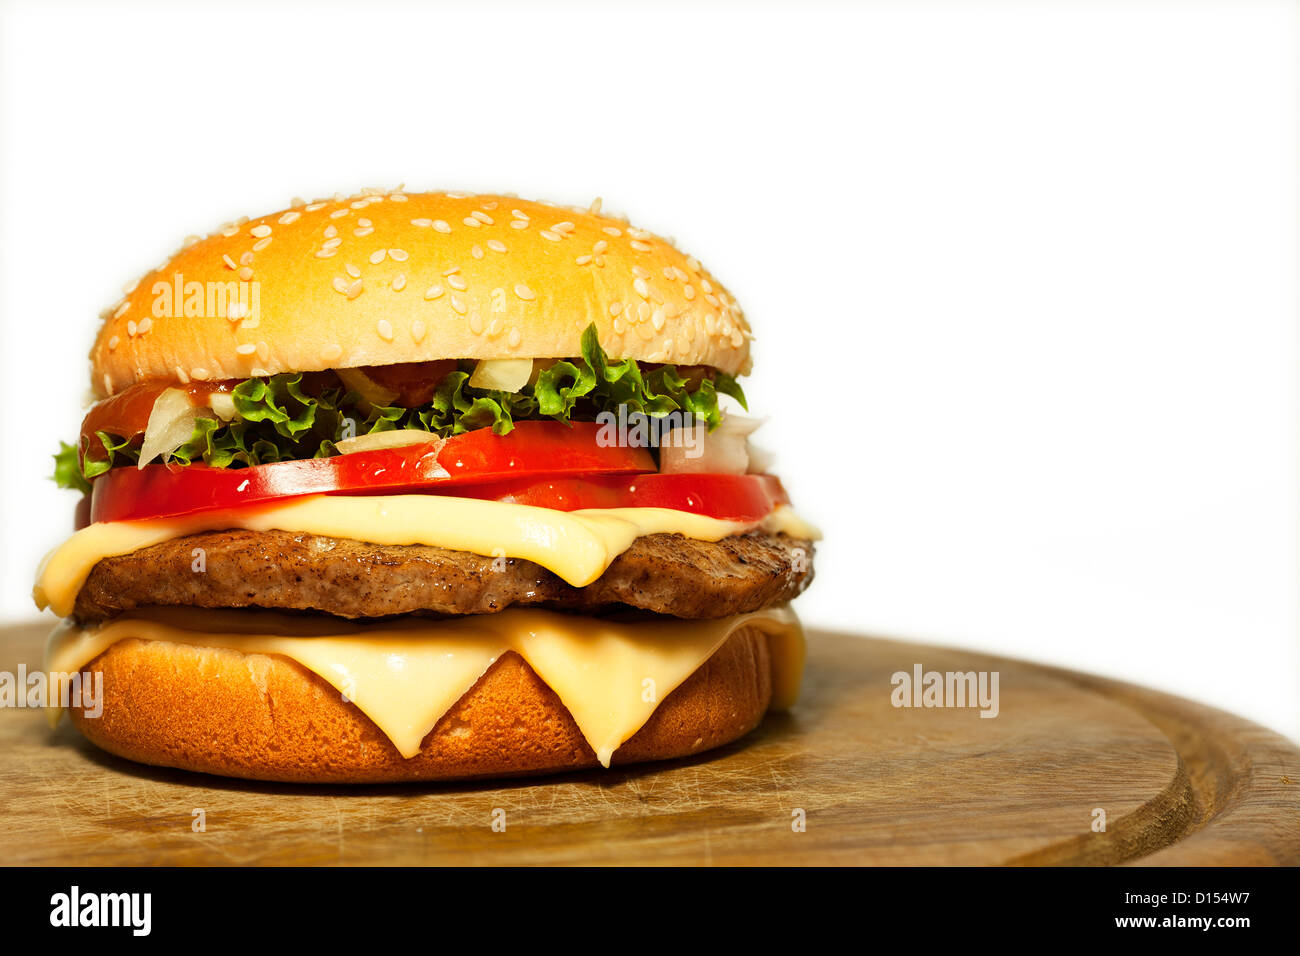 Cheeseburger on the wooden table. Isolated on white. Stock Photo